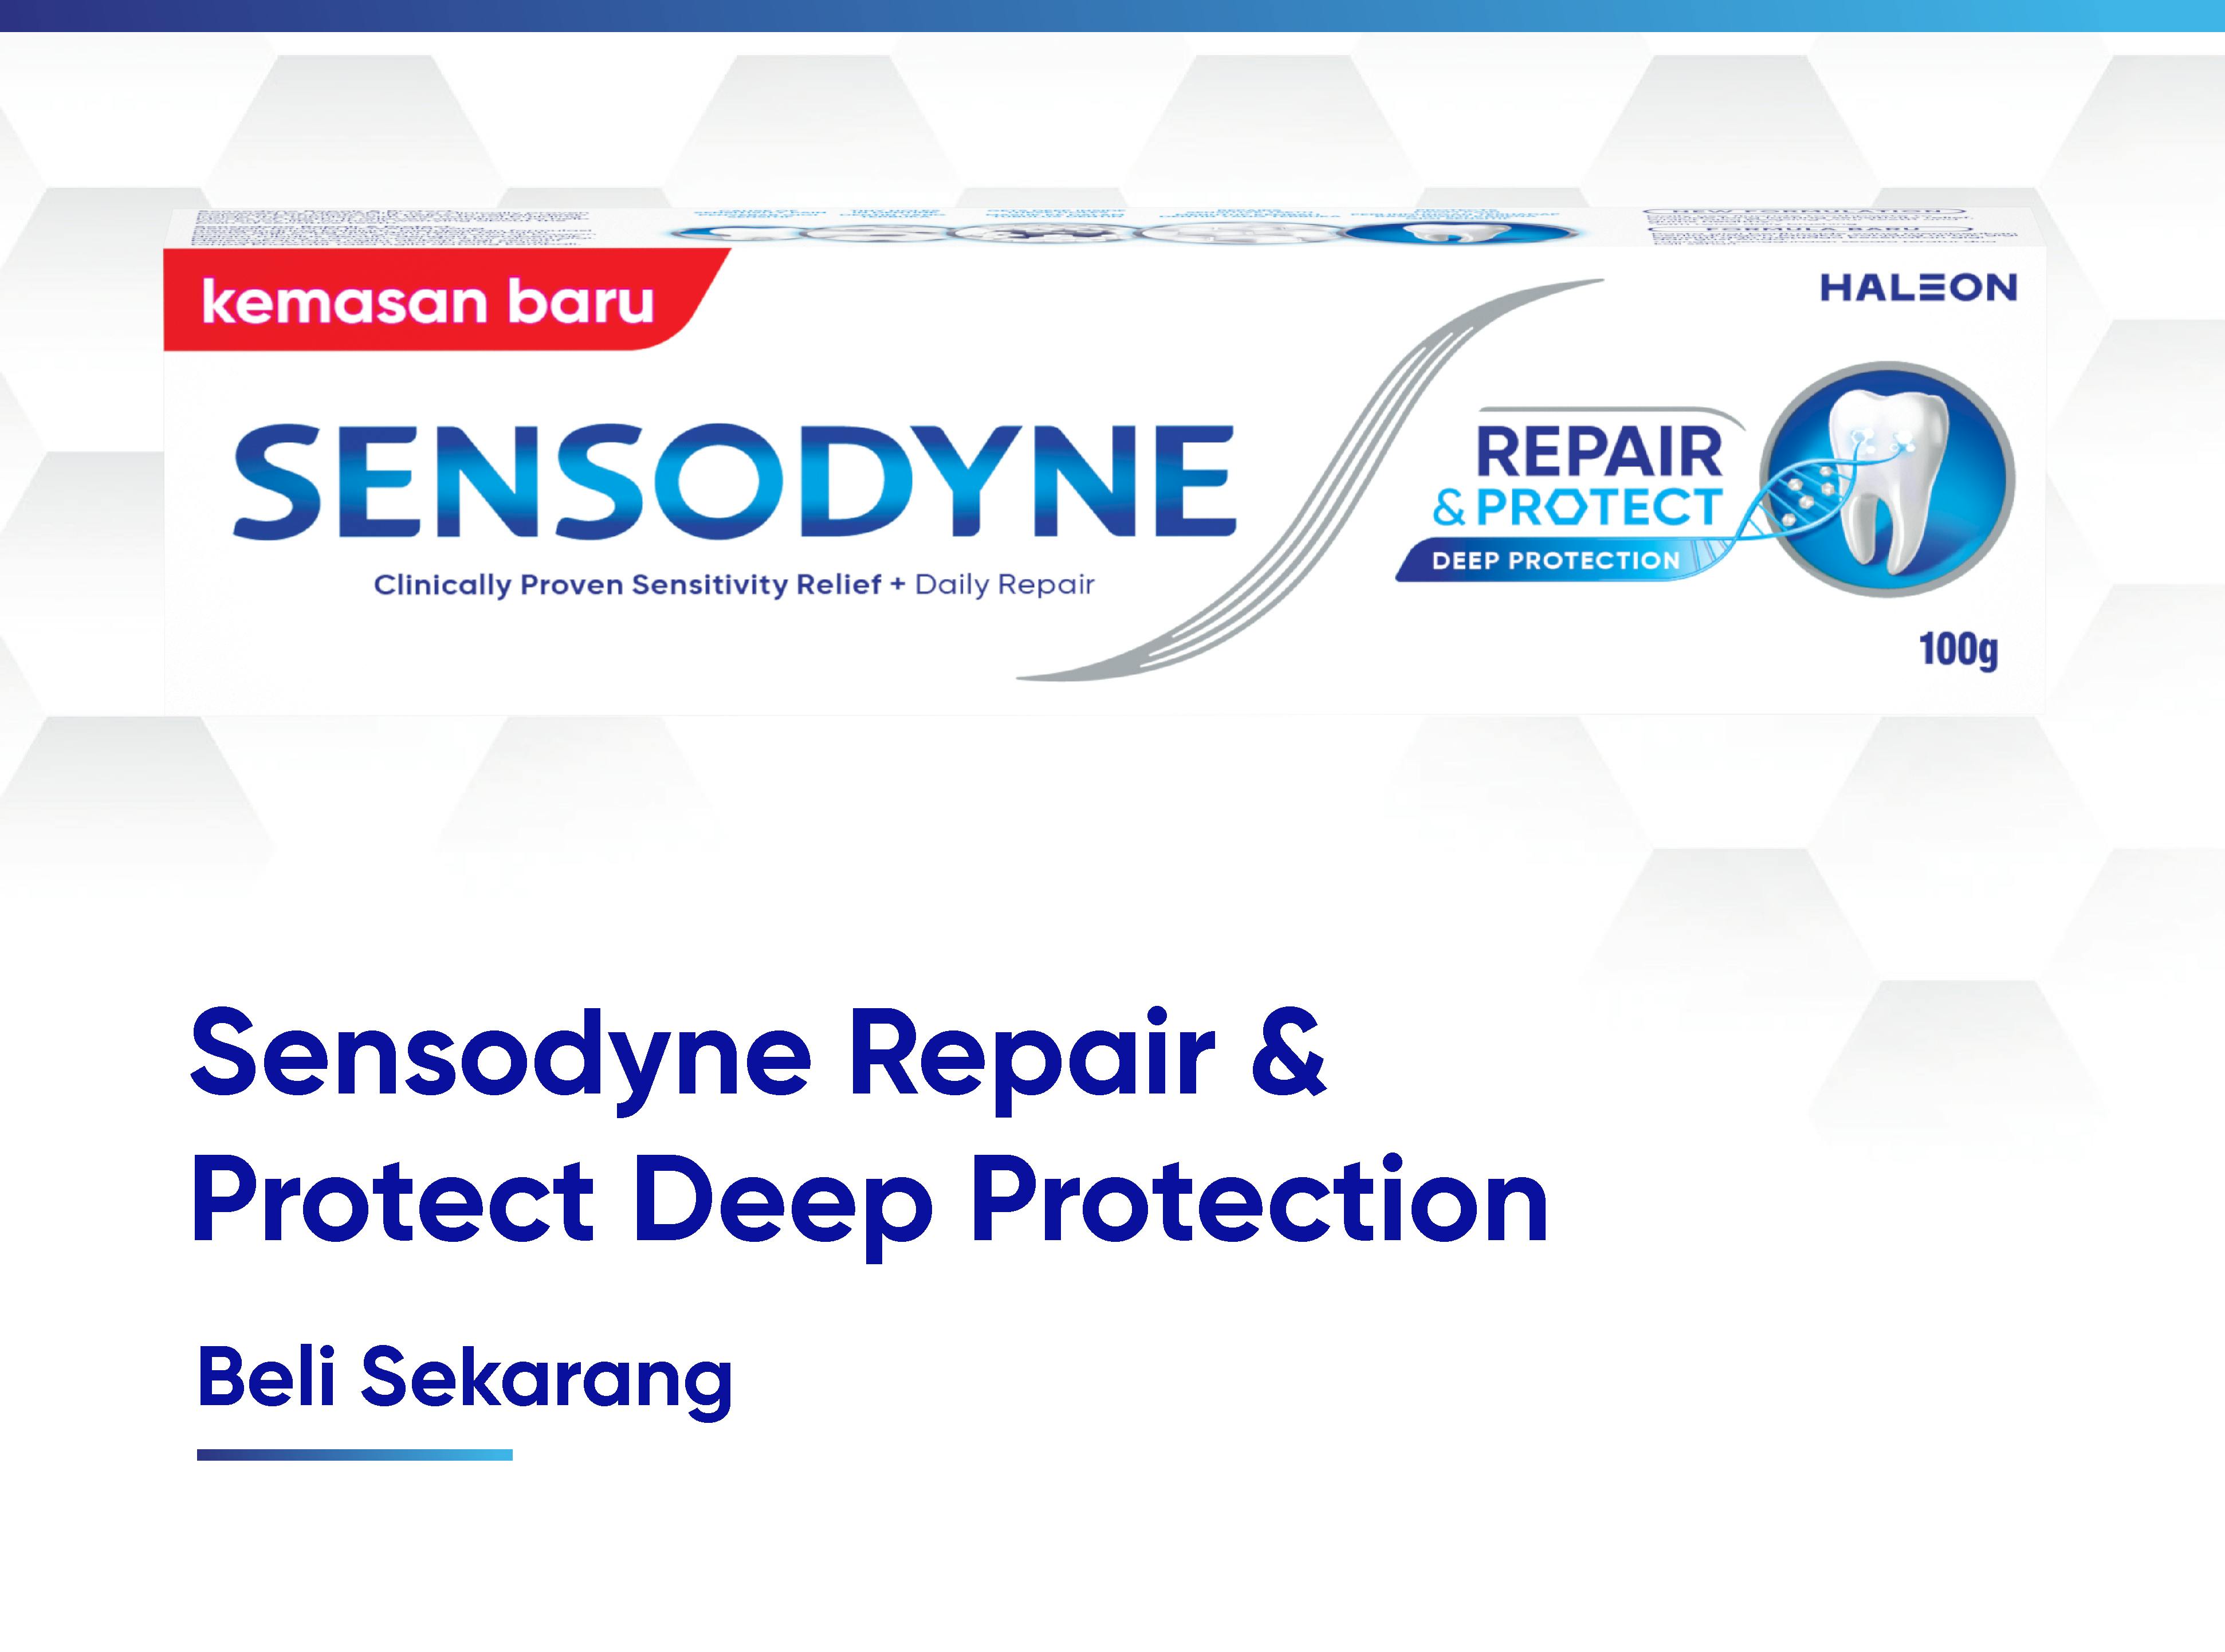 Sensodyne repair and protect toothpaste Indonesia pack shot